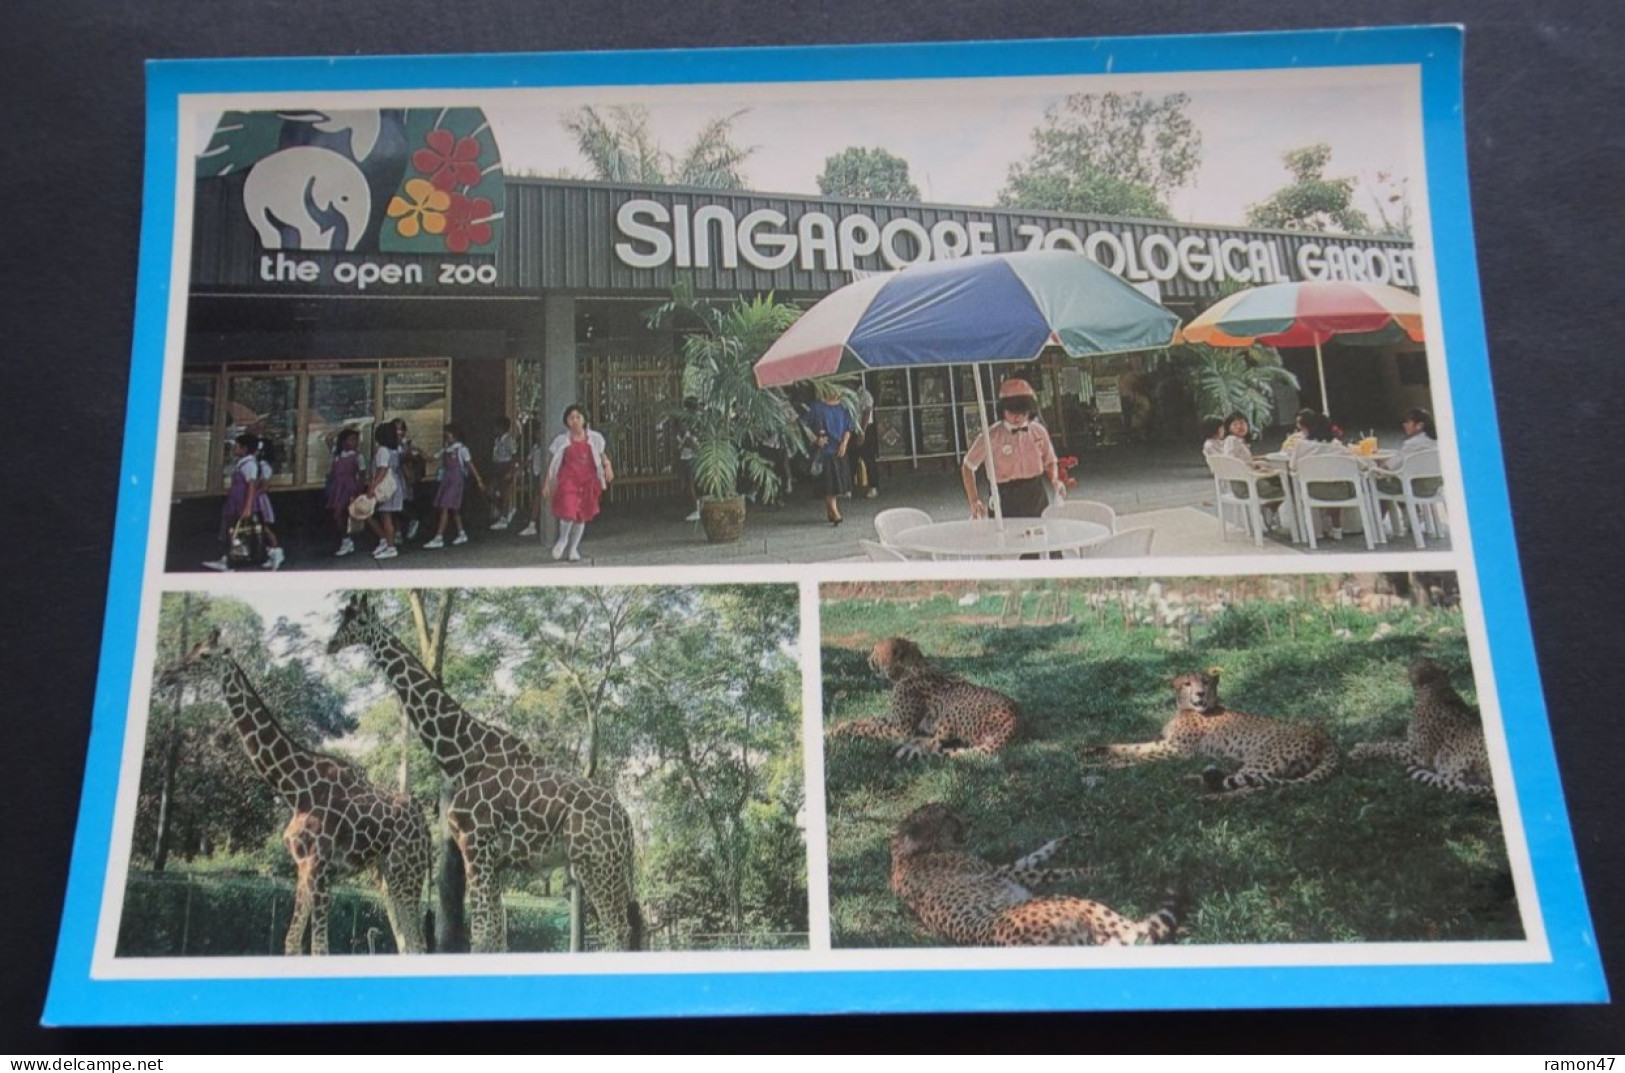 Singapore - Zoological Garden, The Open Zoo - Associated Marketing Agency - Singapore